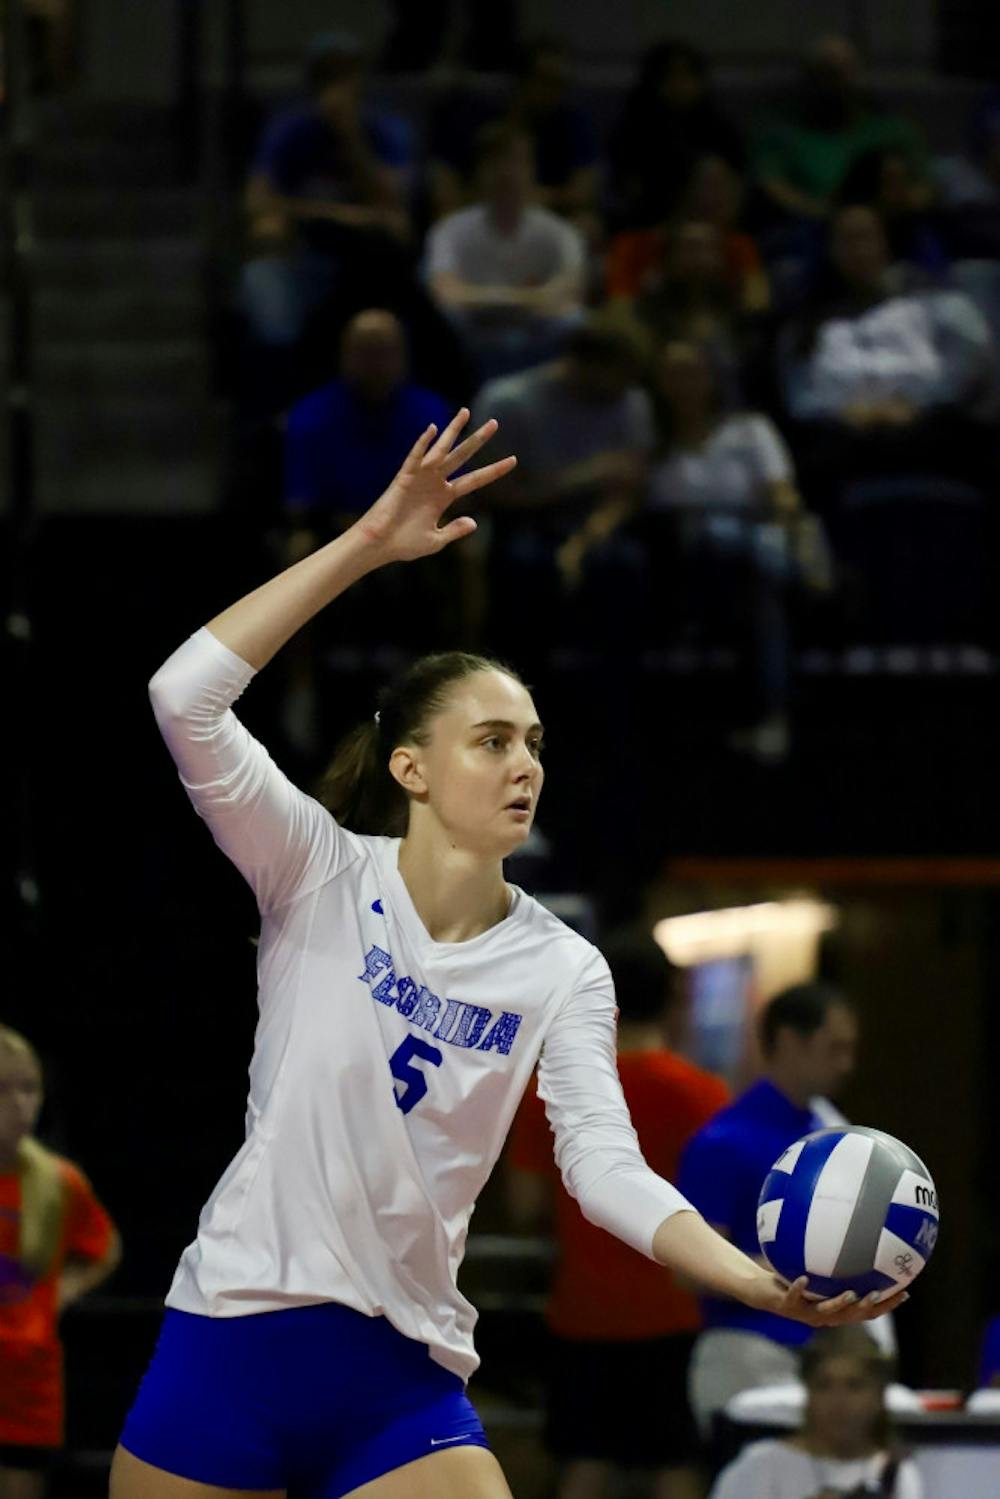 <p dir="ltr"><span>Senior middle blocker Rachael Kramer said she'd like to stay another year if it meant she could play softball for coach Tim Walton. </span></p>